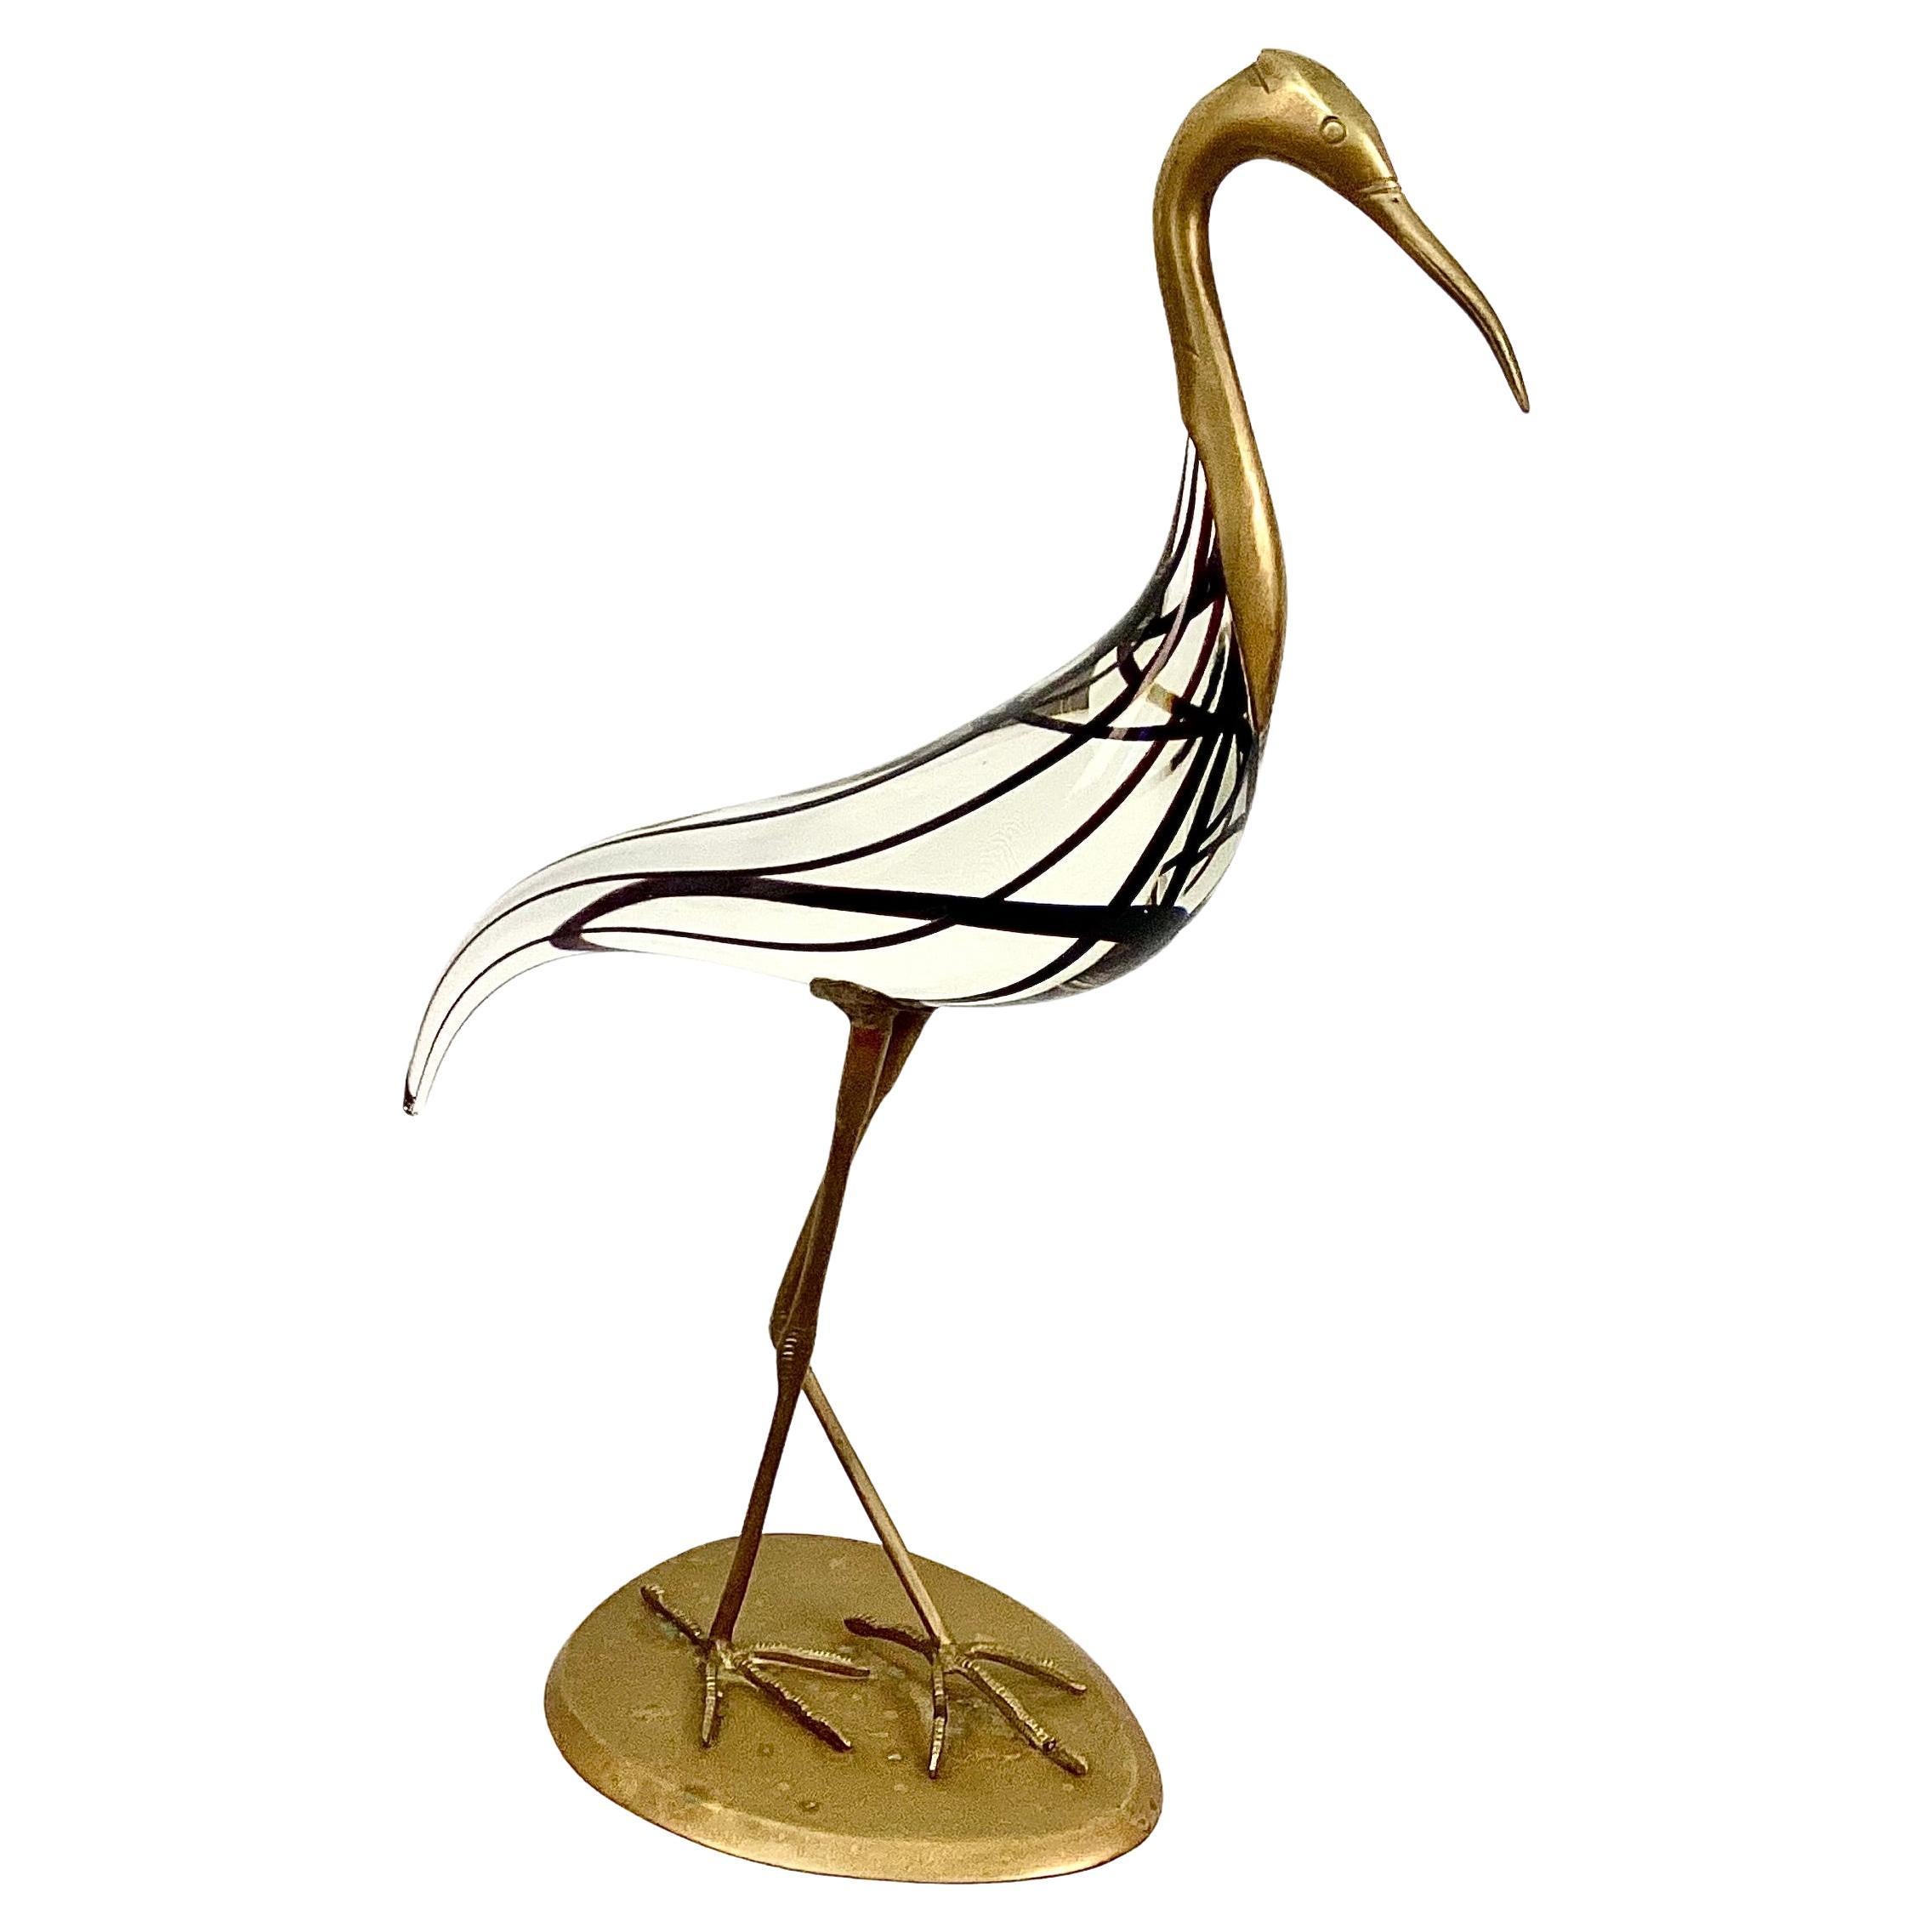 Impressive 20th century Italian Murano Glass Sculpture Of A Heron, attributed to designer Luca Bojola for Lico Zanetti, Florence, Italy. Sculpture features heavy solid glass bird with black threads. Bird's face neck, beak, legs and feet are brass,